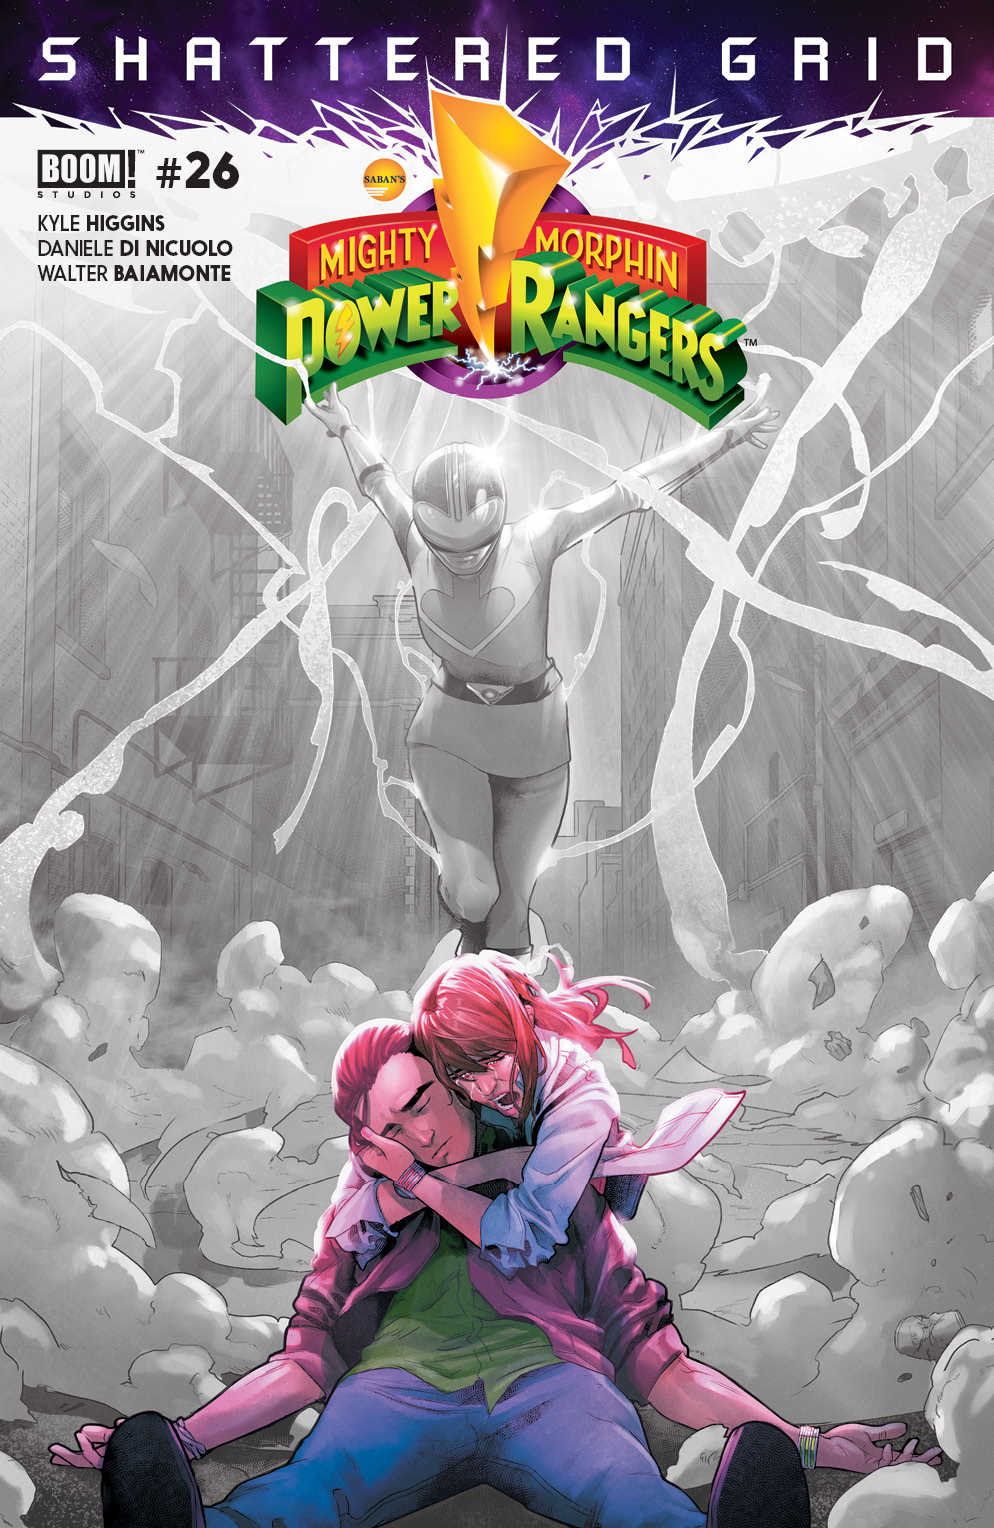 MIGHTY MORPHIN POWER RANGERS #26 SG (2ND PTG)